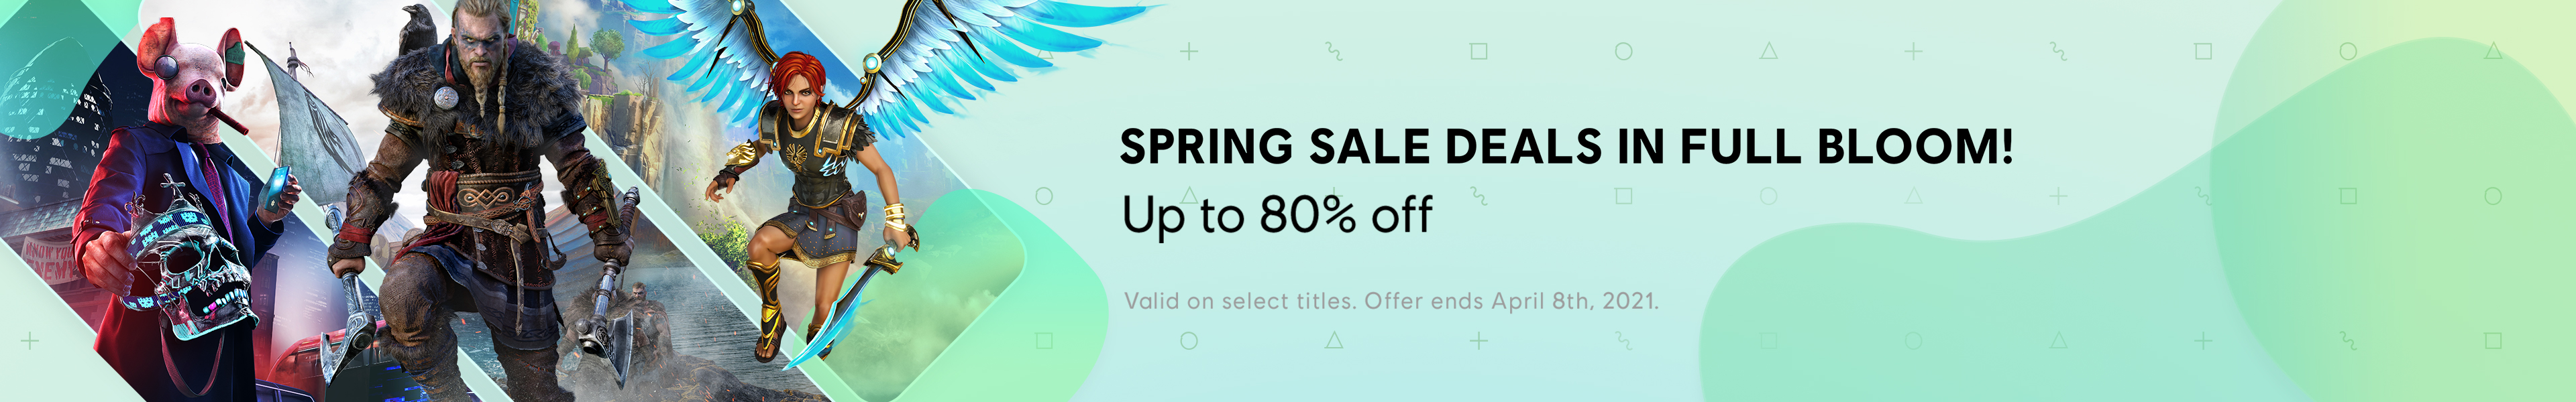 Spring Sale Category banner